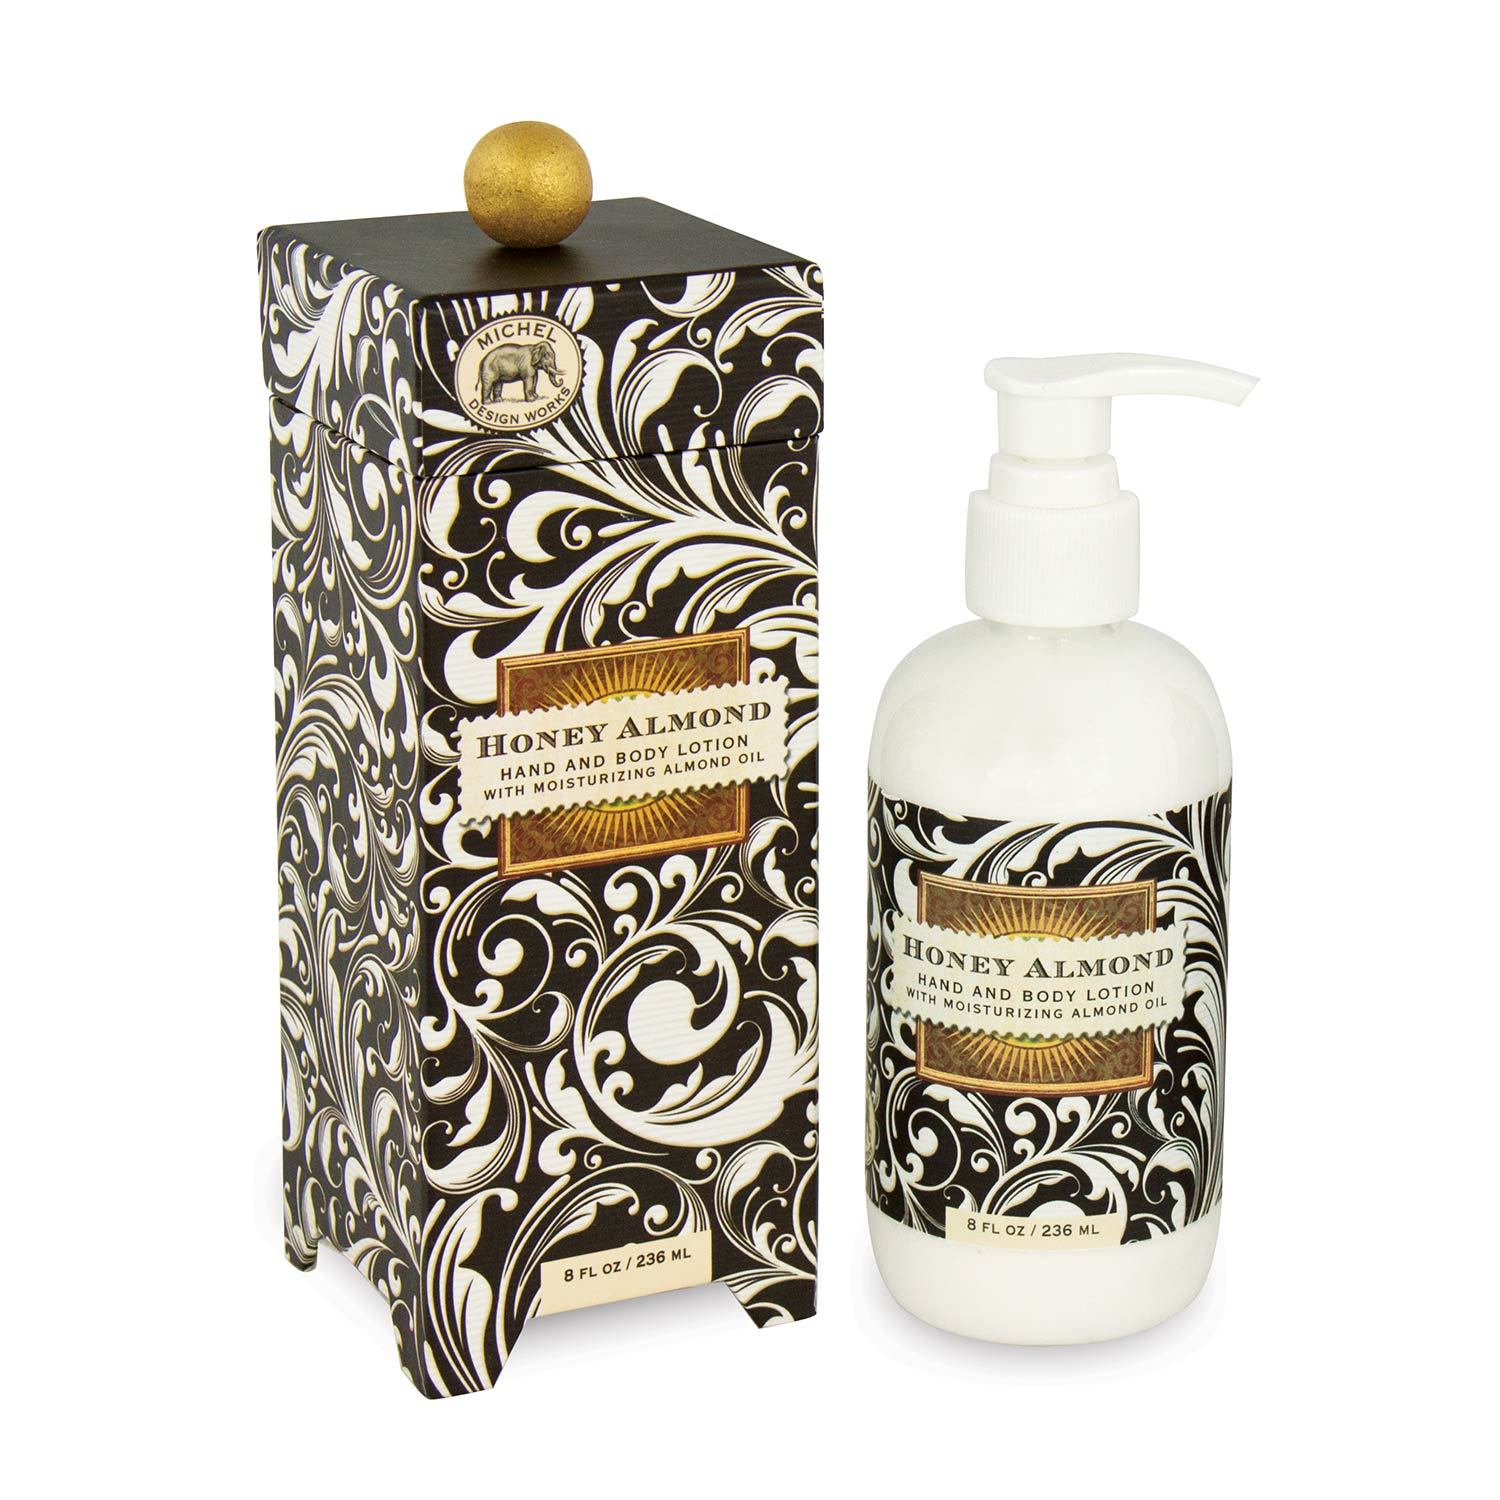 HONEY ALMOND HAND AND BODY LOTION LOT182 - Molly's! A Chic and Unique Boutique 